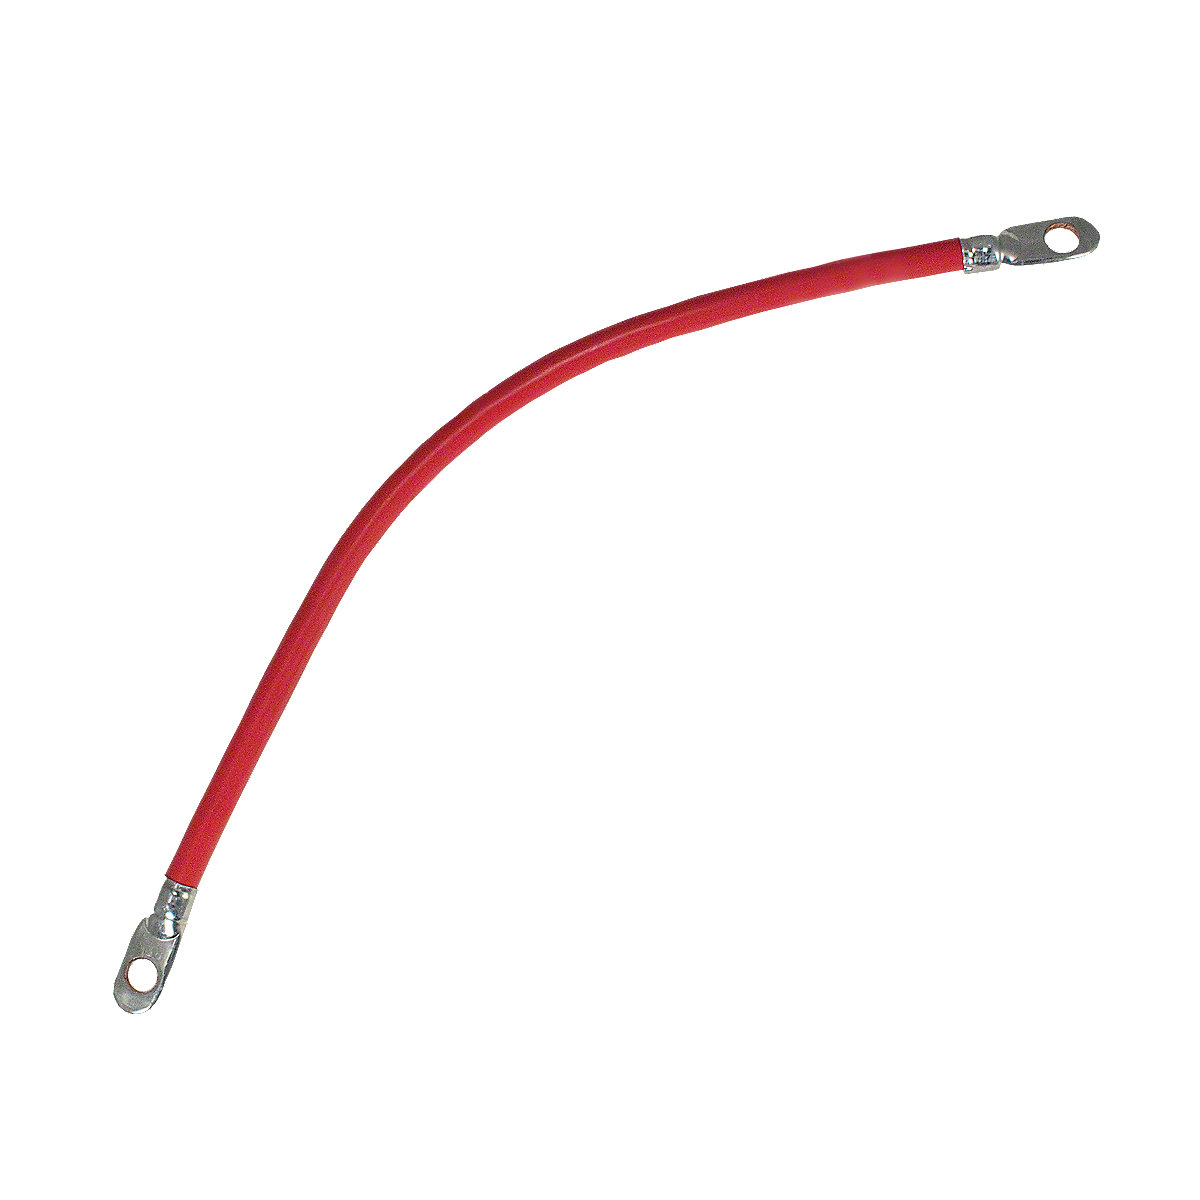 16-1/4 Starter To Switch Cable For Massey Ferguson: TO20, TO30, And Massey Harris Tractors.